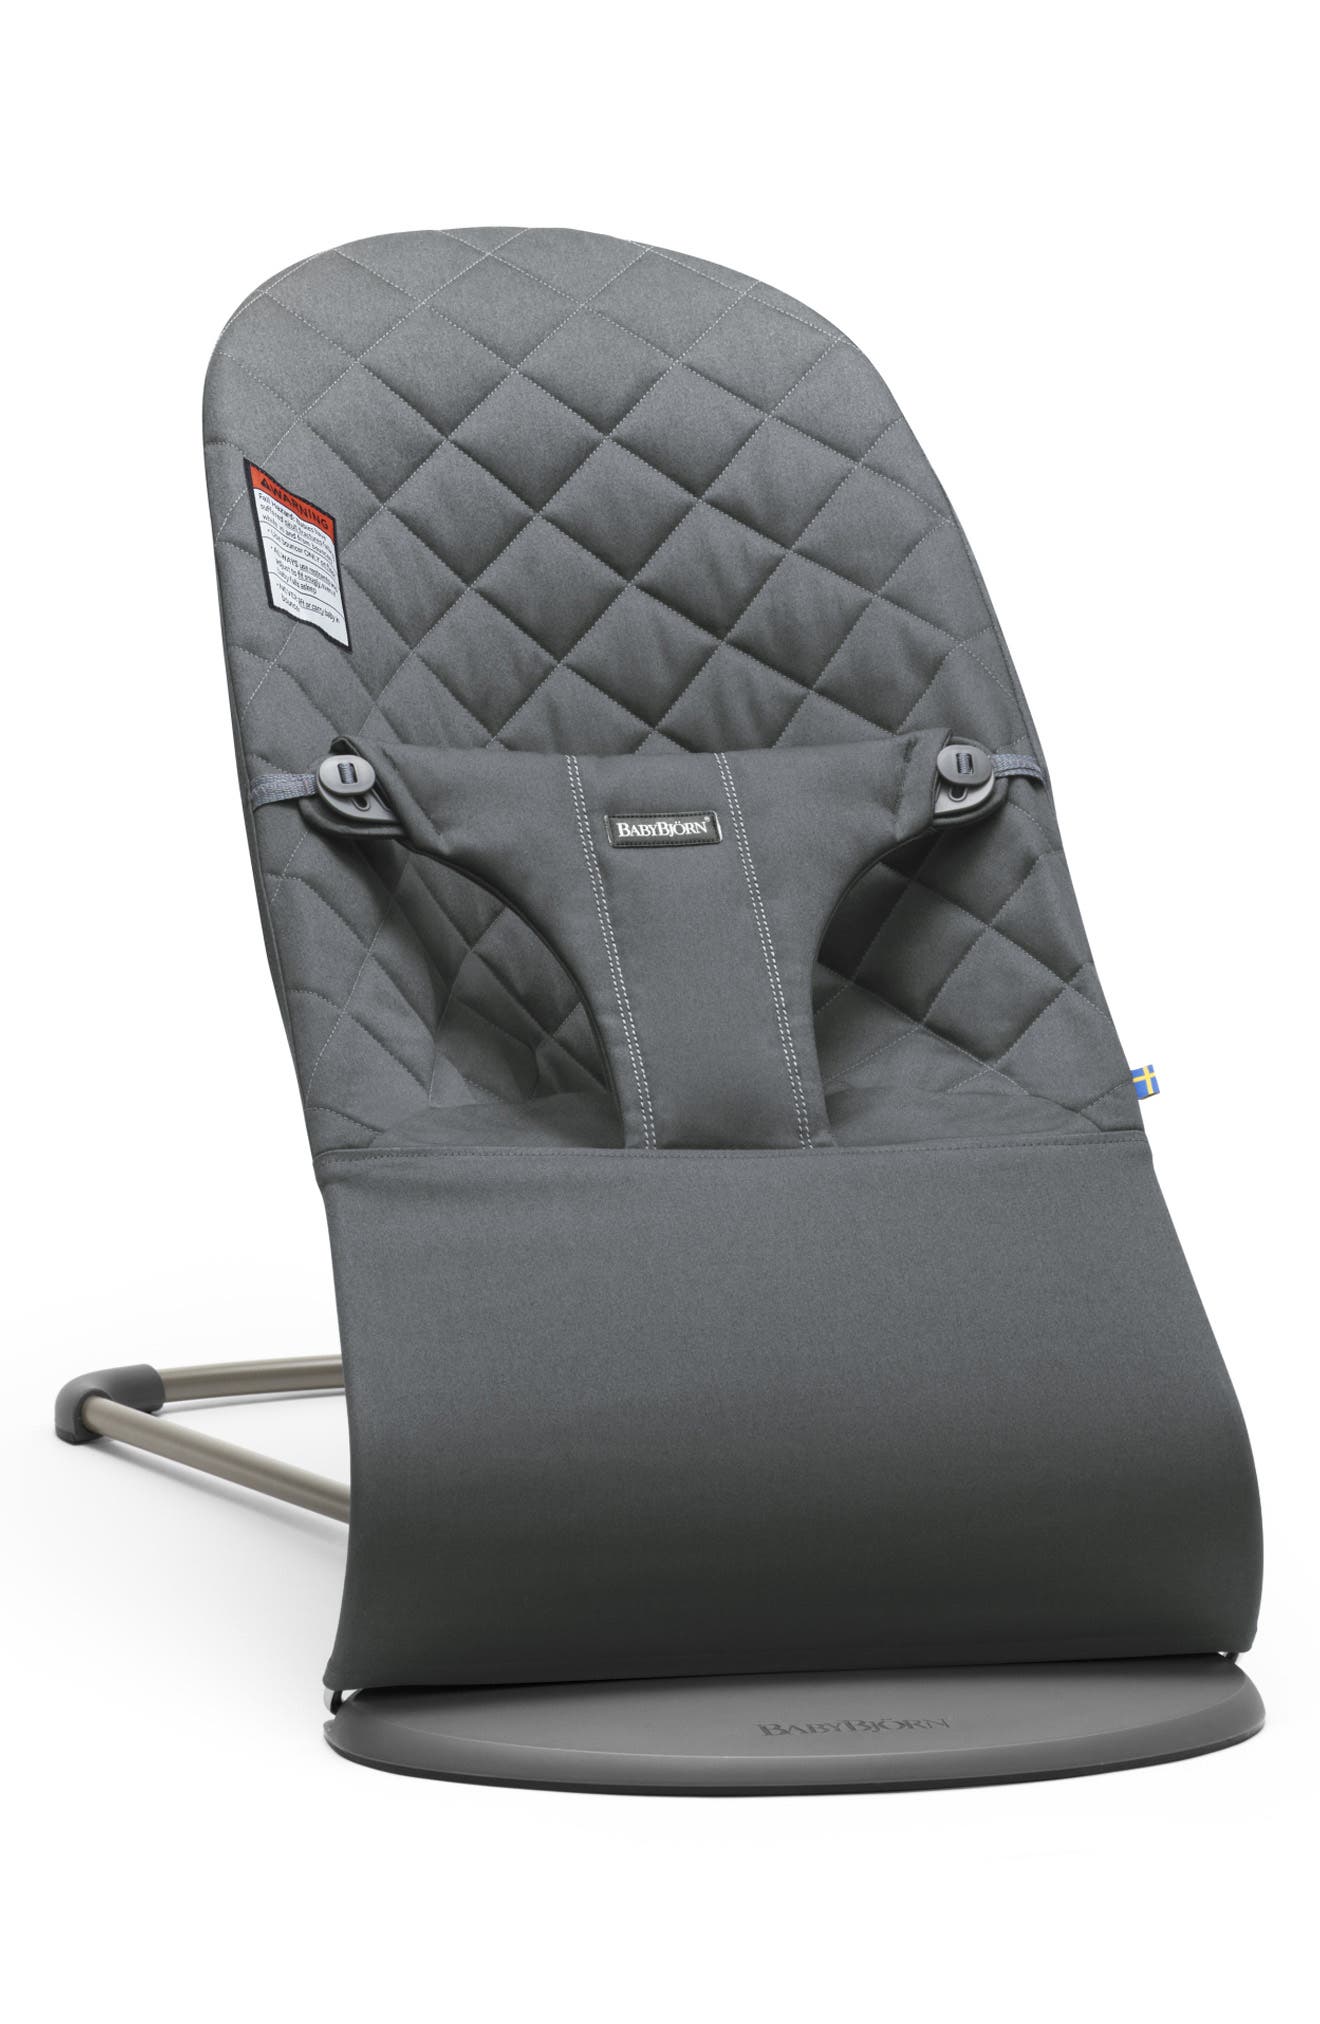 Infant Babybjorn Bouncer Bliss Convertible Quilted Baby Bouncer, Size One Size - Grey -  Pick up, item in cage